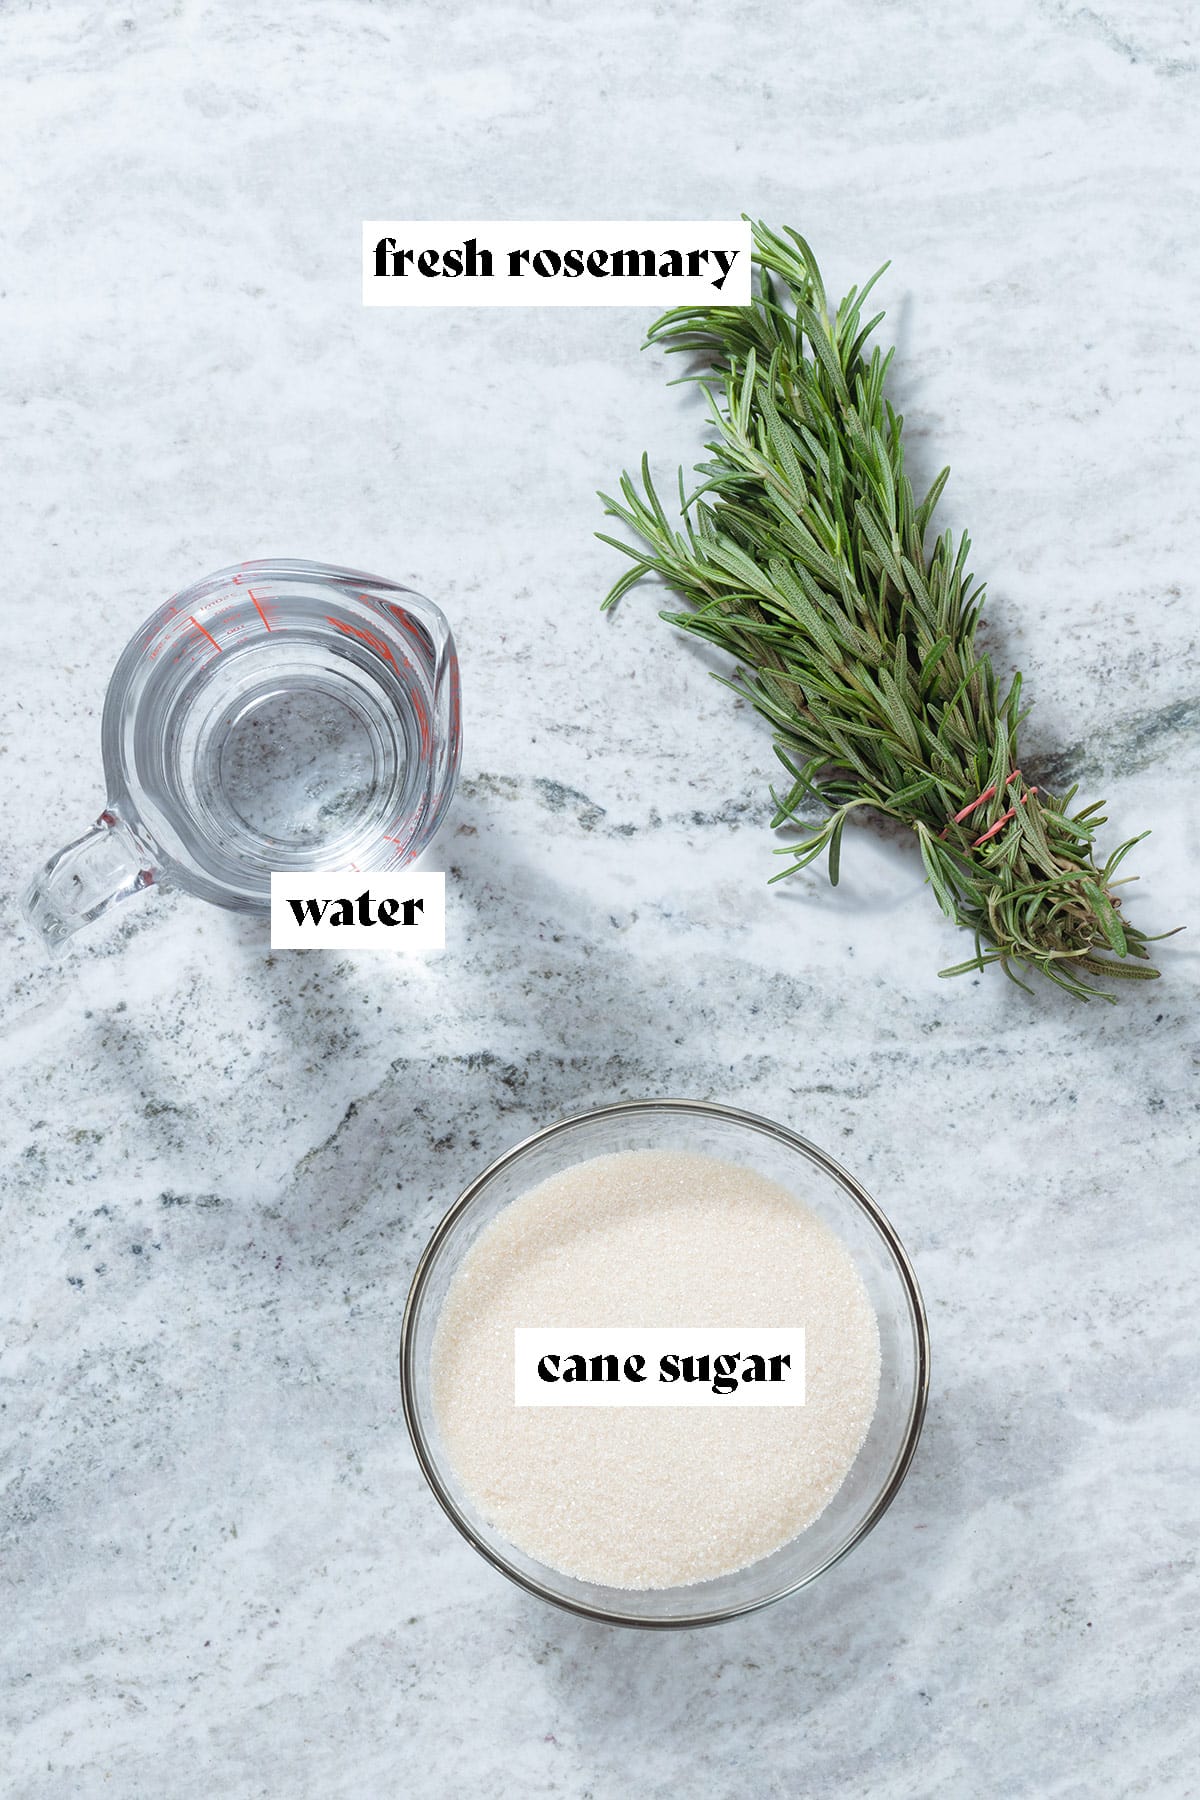 Cane sugar, fresh rosemary, and water on a grey stone background with text overlay.